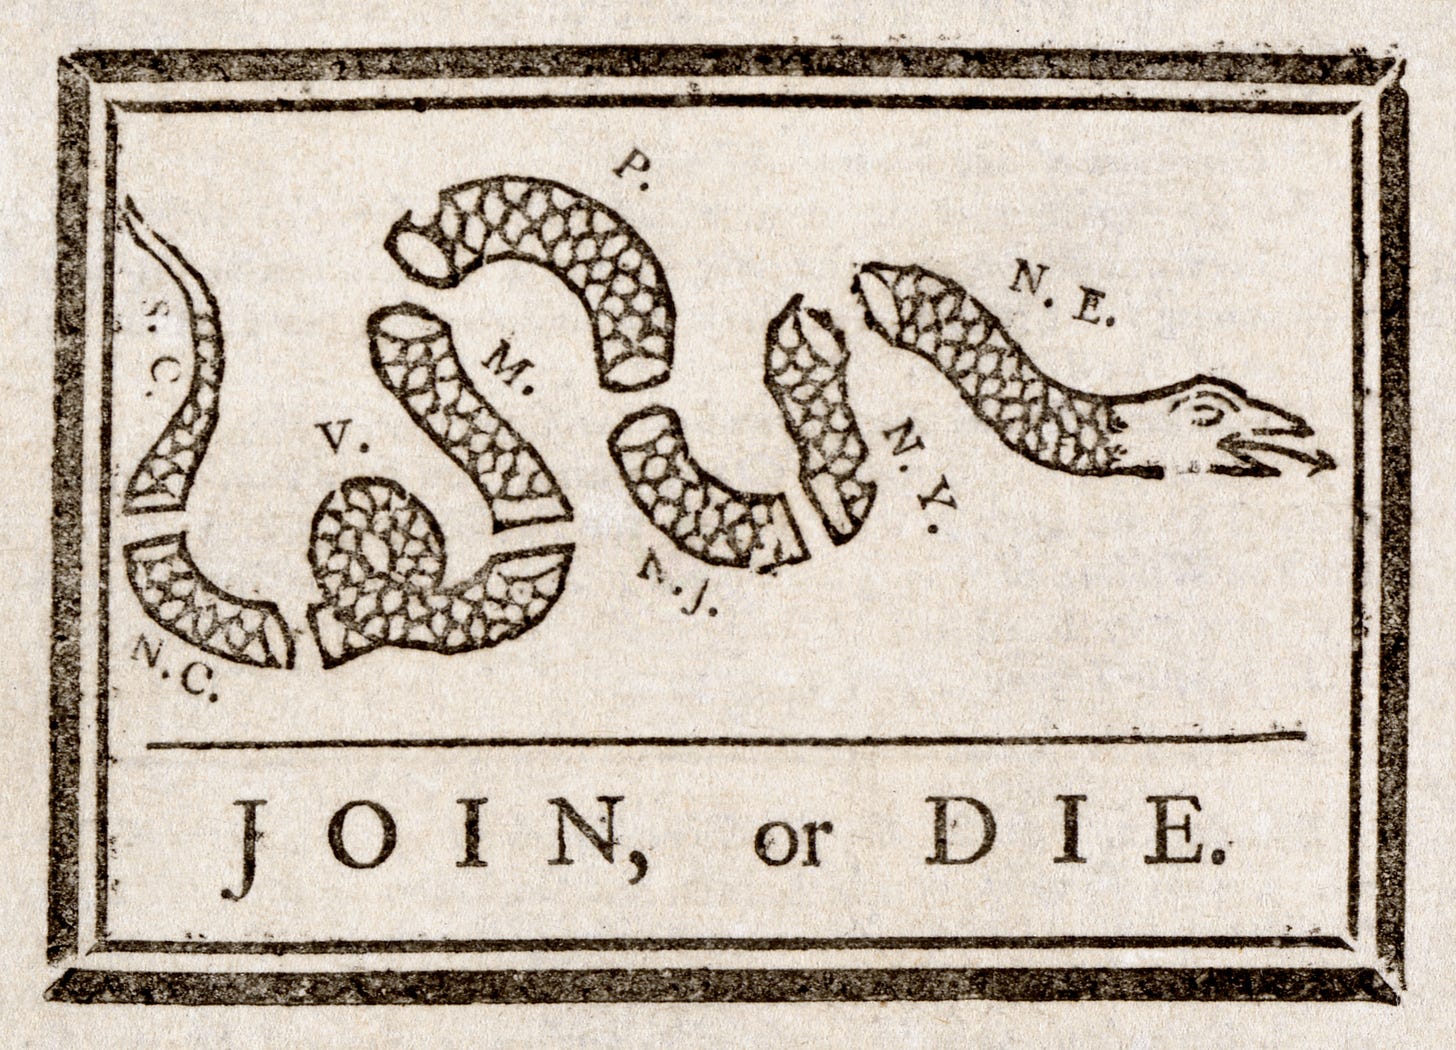 Join, or Die - Wikipedia